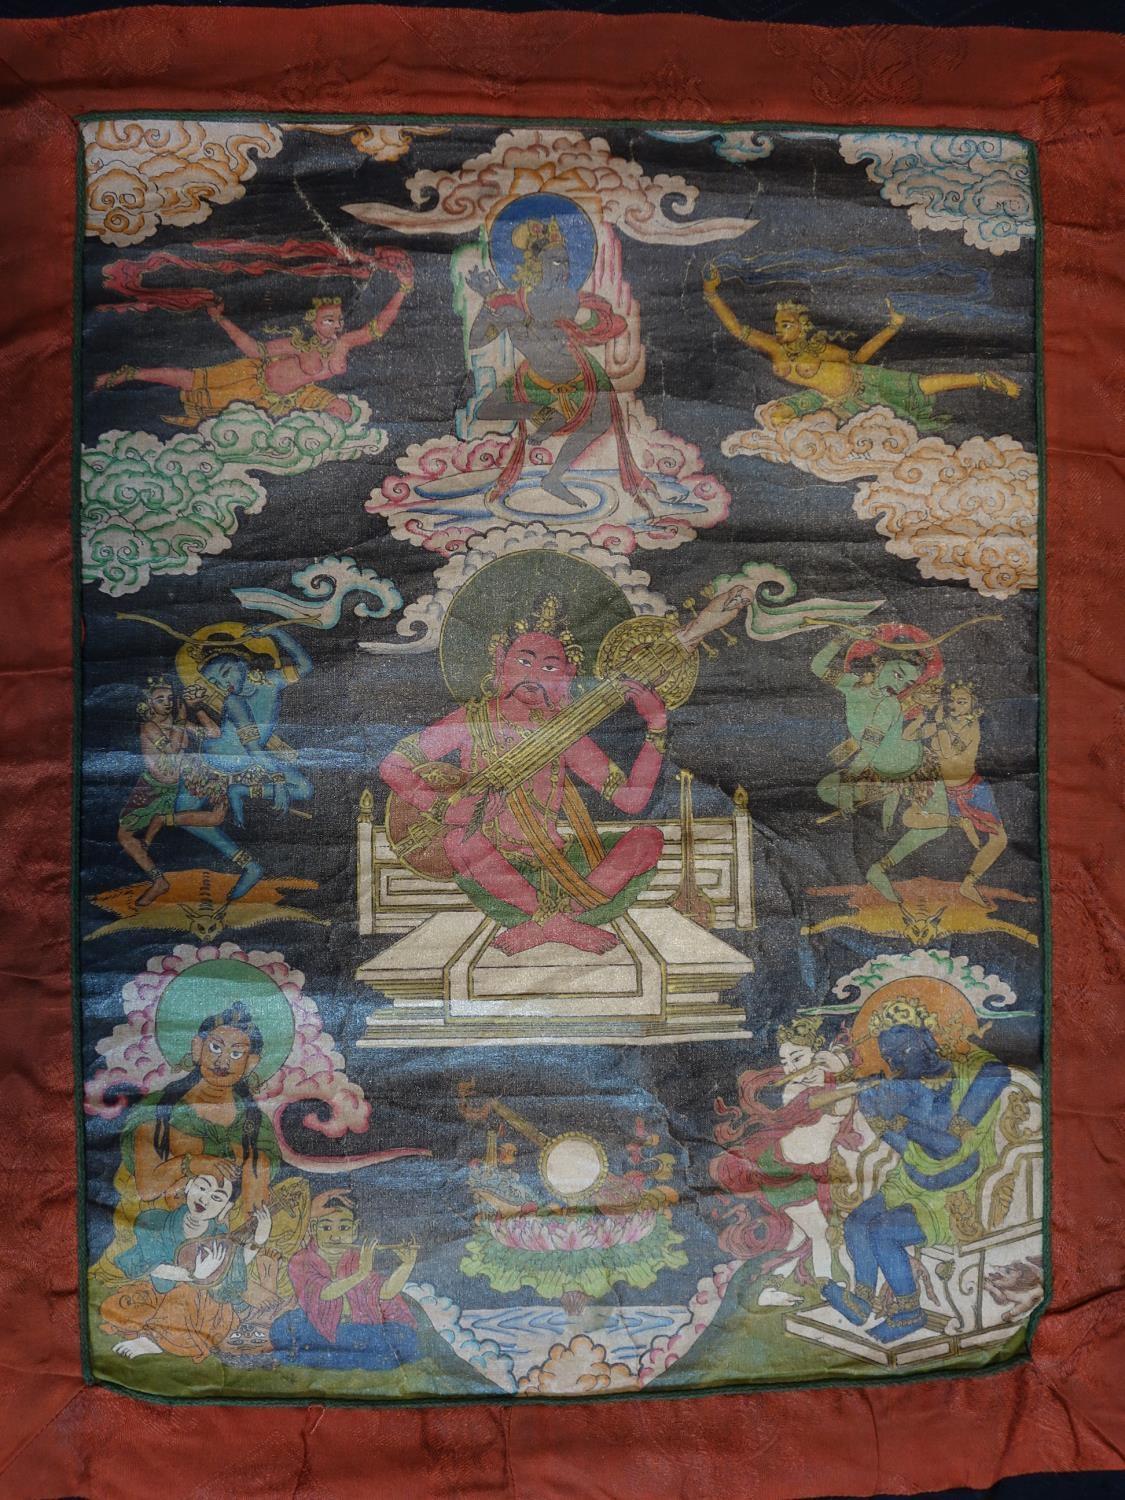 A hand-painted Tibetan Thangka depicting a deity in a landscape scene with animals, having script to - Image 2 of 7